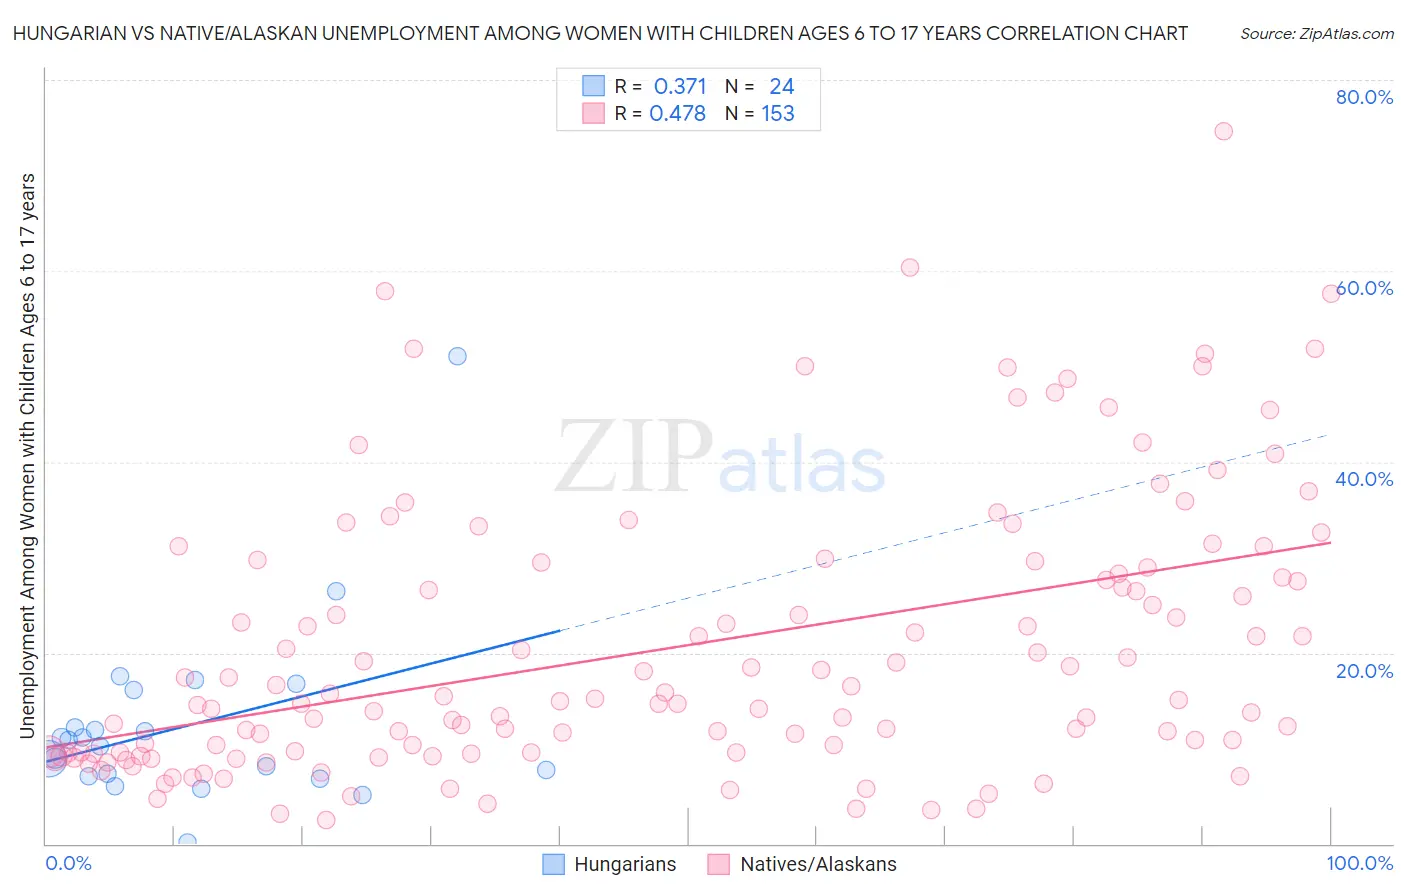 Hungarian vs Native/Alaskan Unemployment Among Women with Children Ages 6 to 17 years